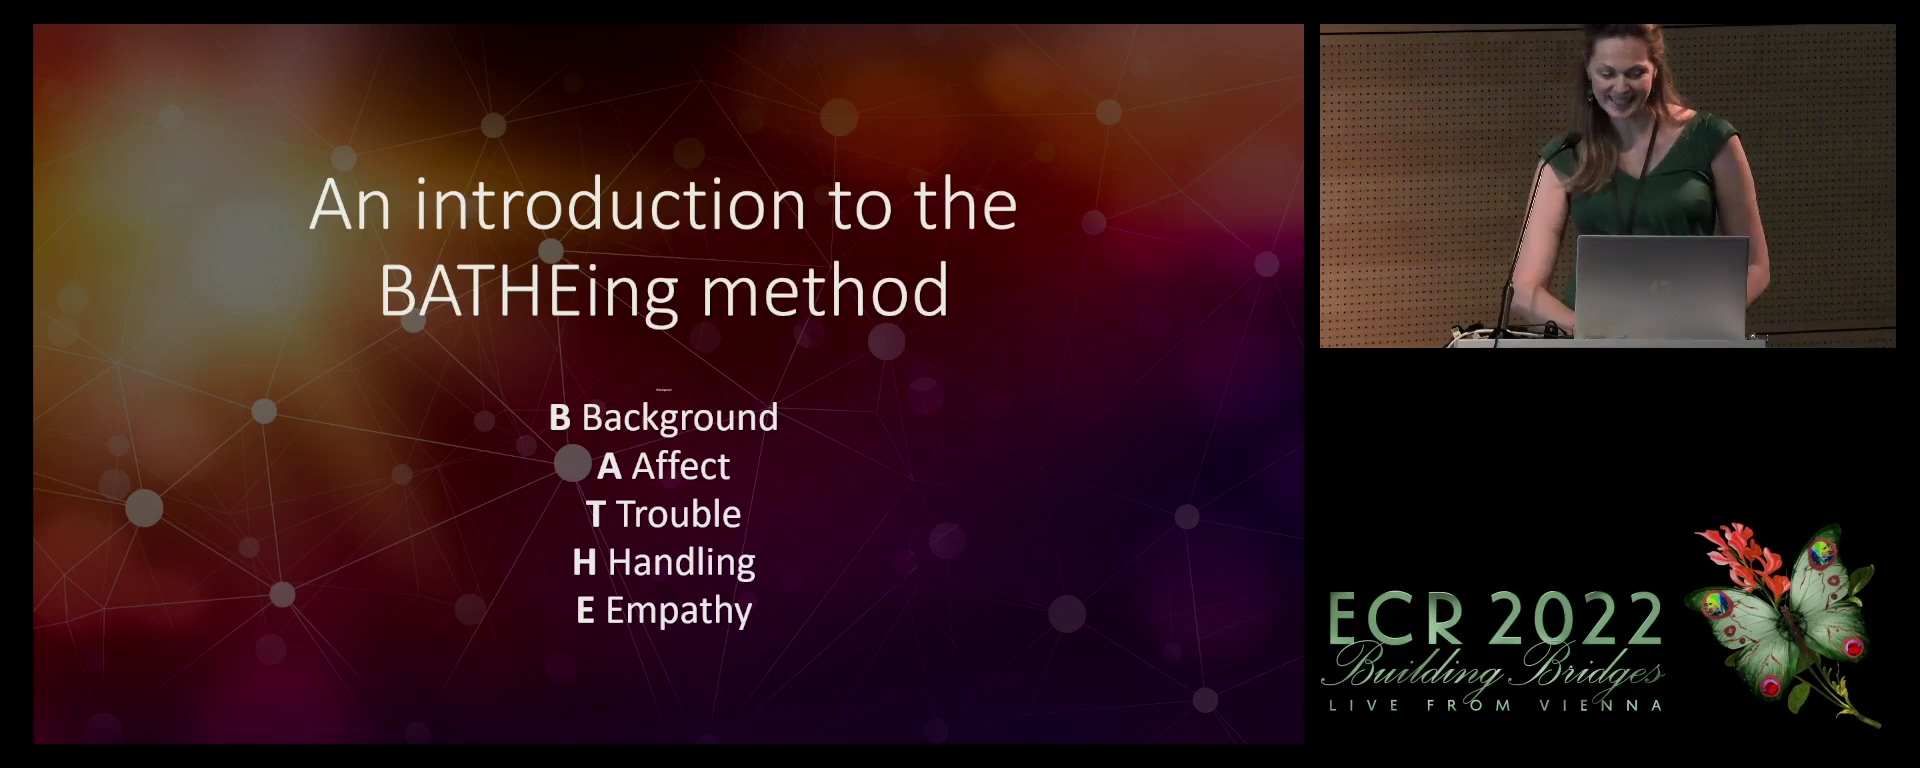 An introduction to the BATHEing method - Caroline Justich, Vienna / AT